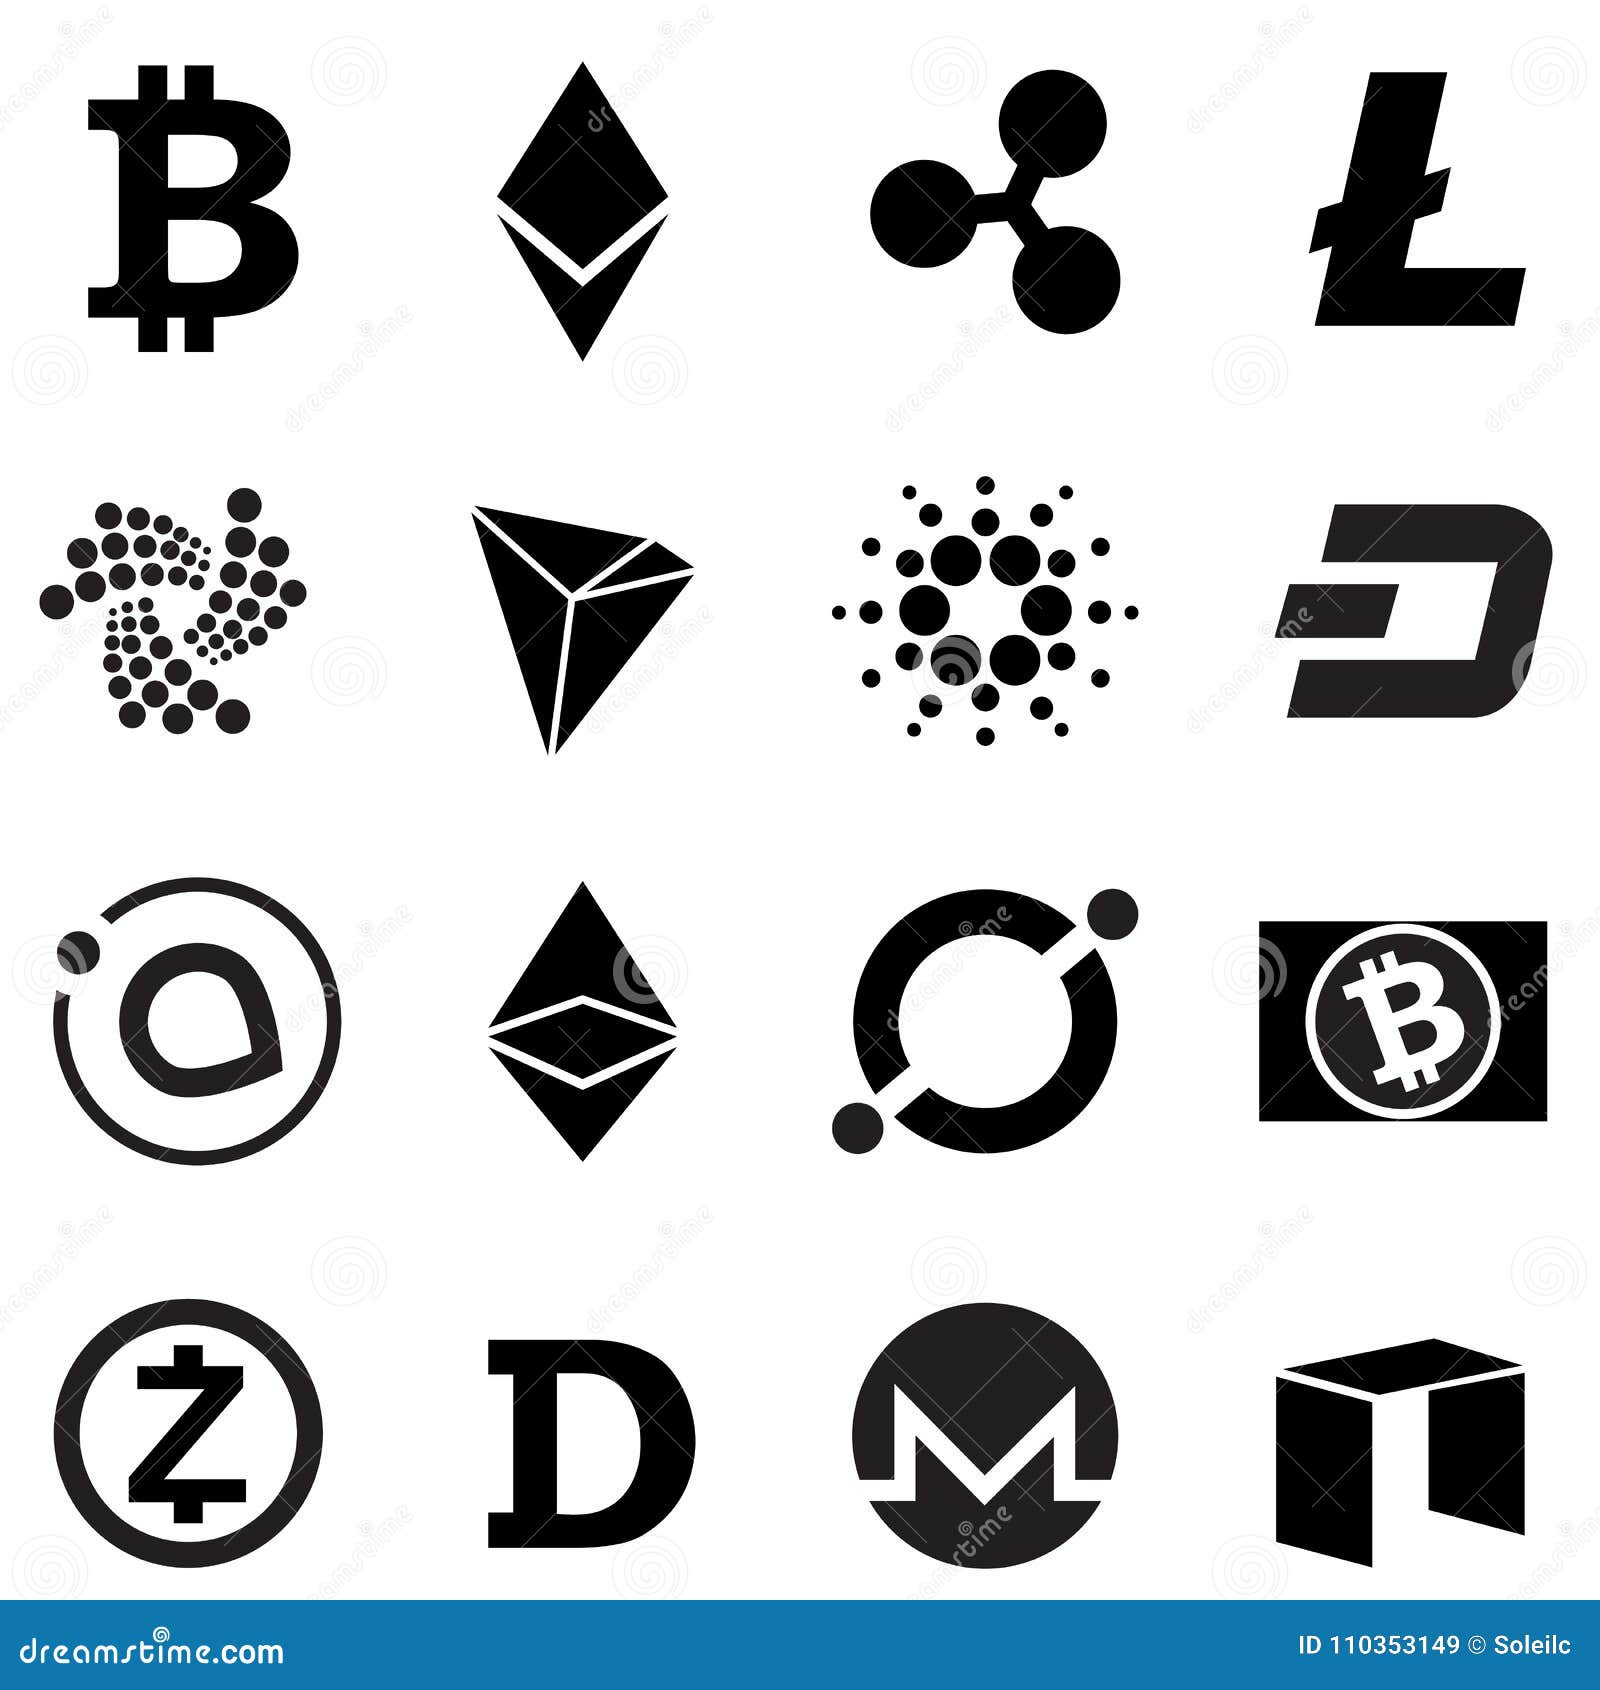 Page 21 | Cryptocurrency Symbols Images - Free Download on Freepik